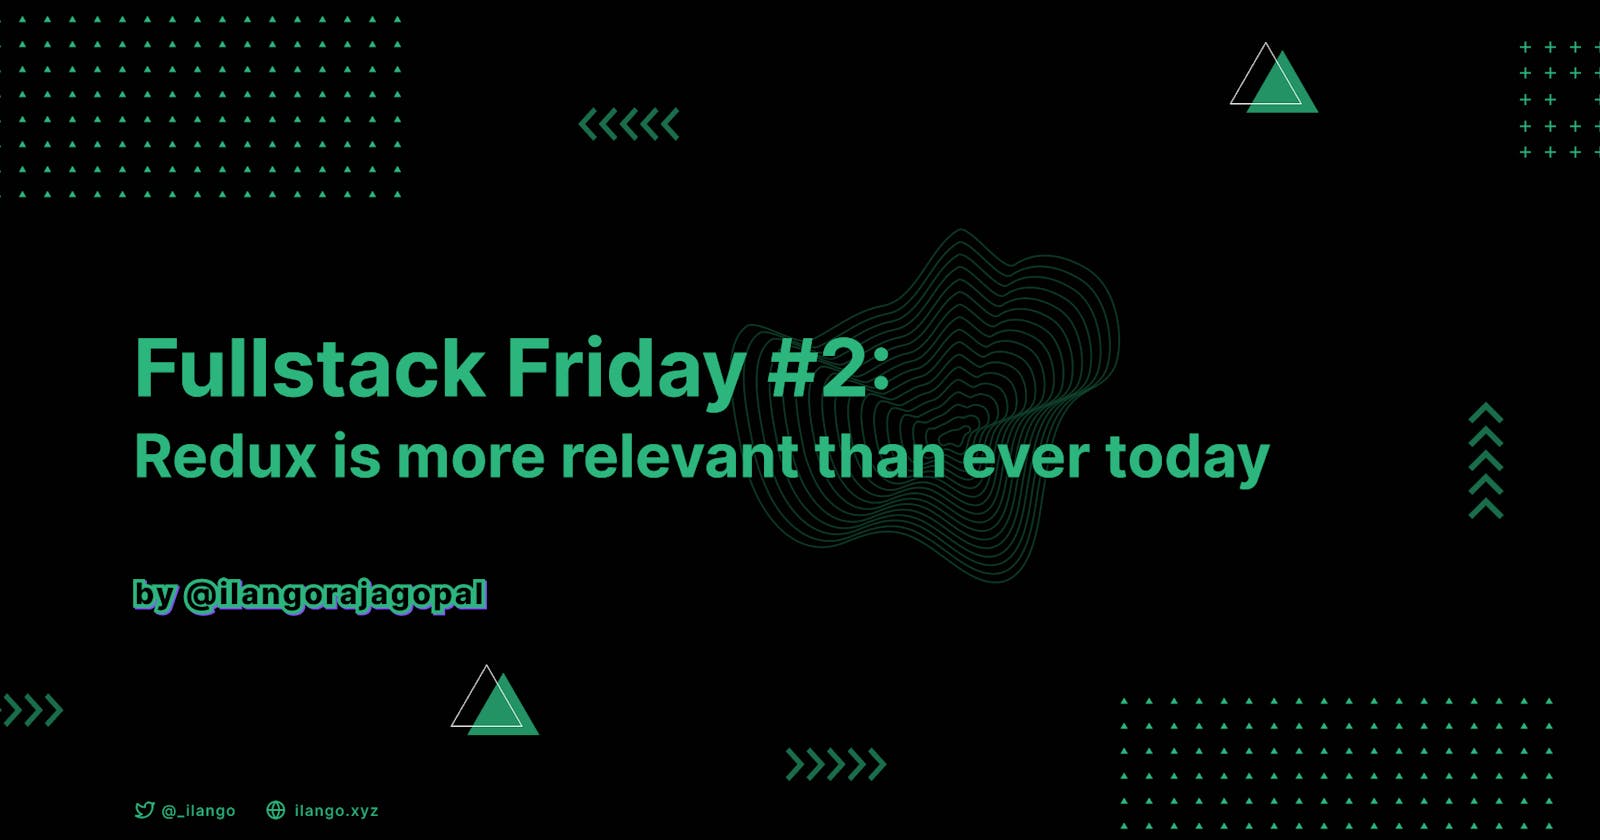 Fullstack Friday #2: Redux is more relevant than ever today